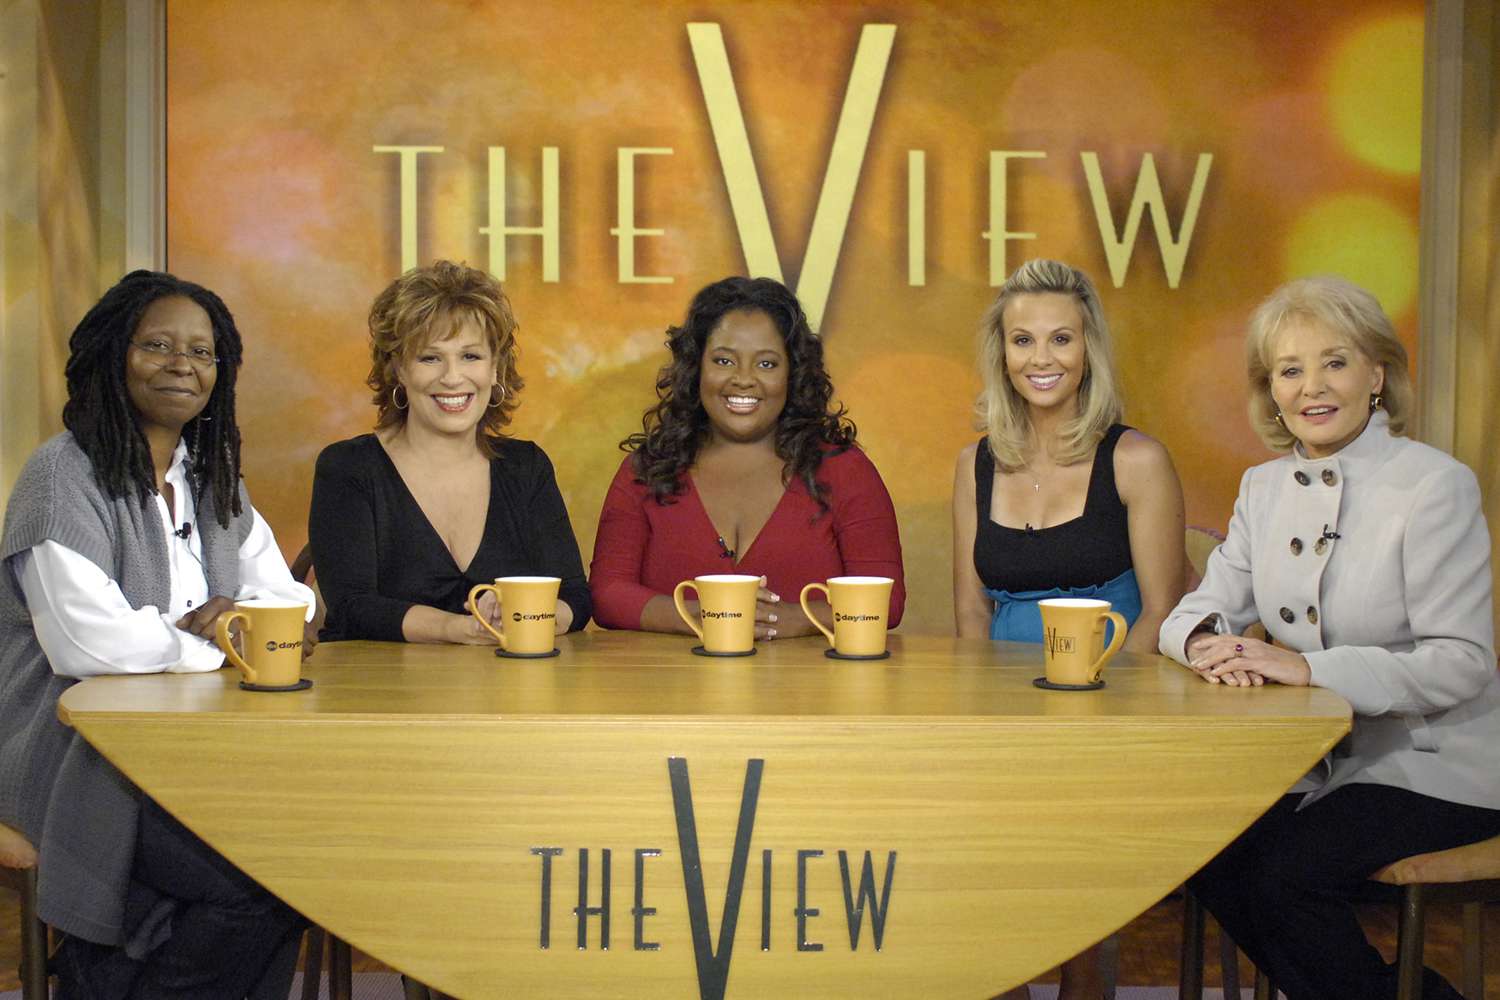 How To Watch The View Without Cable